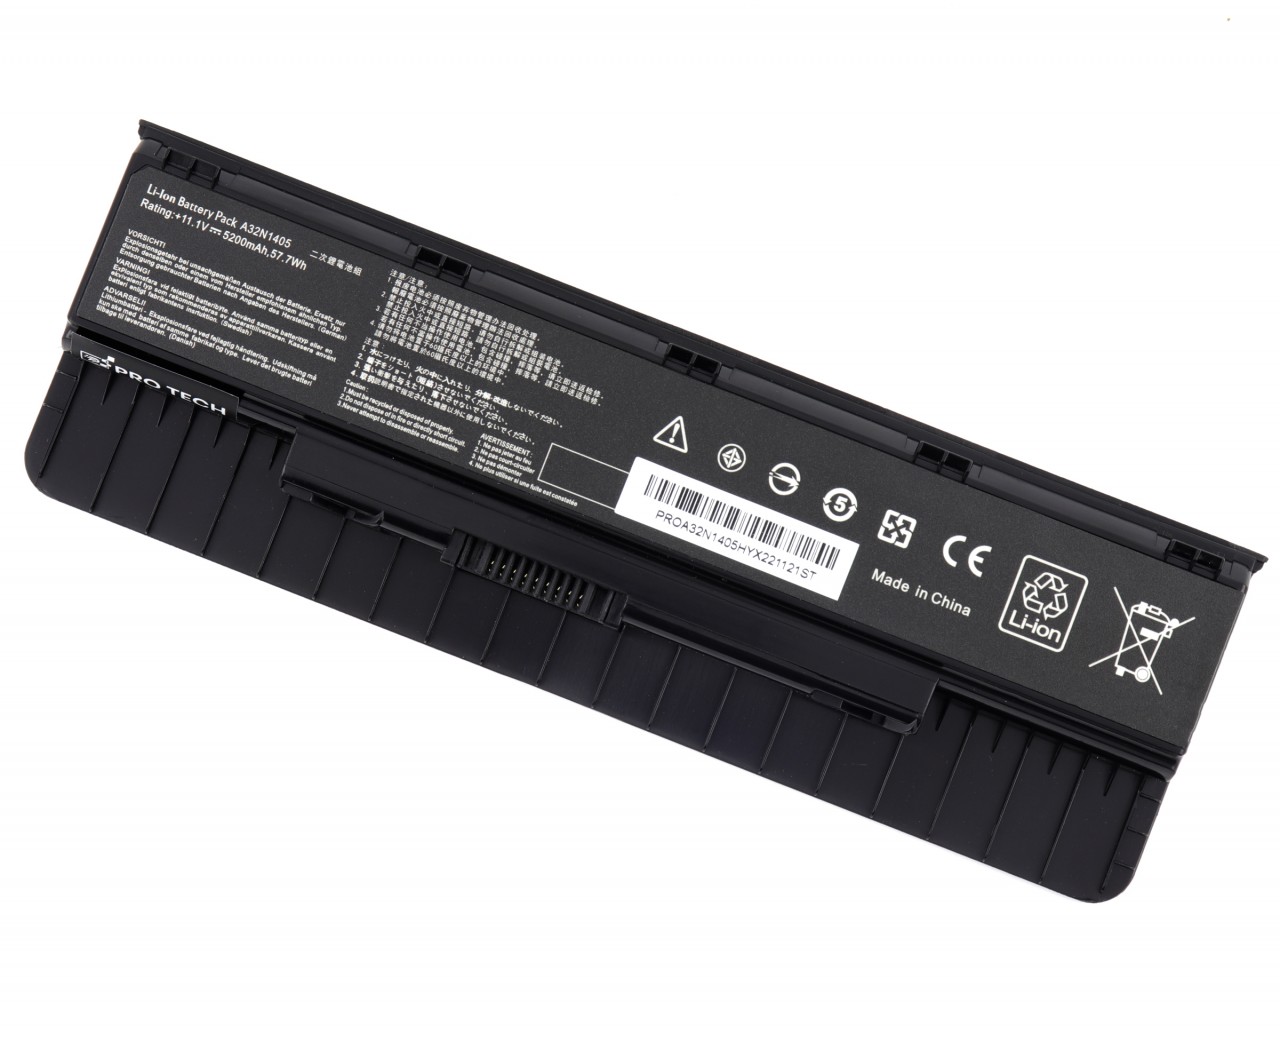 Baterie Asus N76VJ-DH71 57.7Wh / 5200mAh Protech High Quality Replacement image0